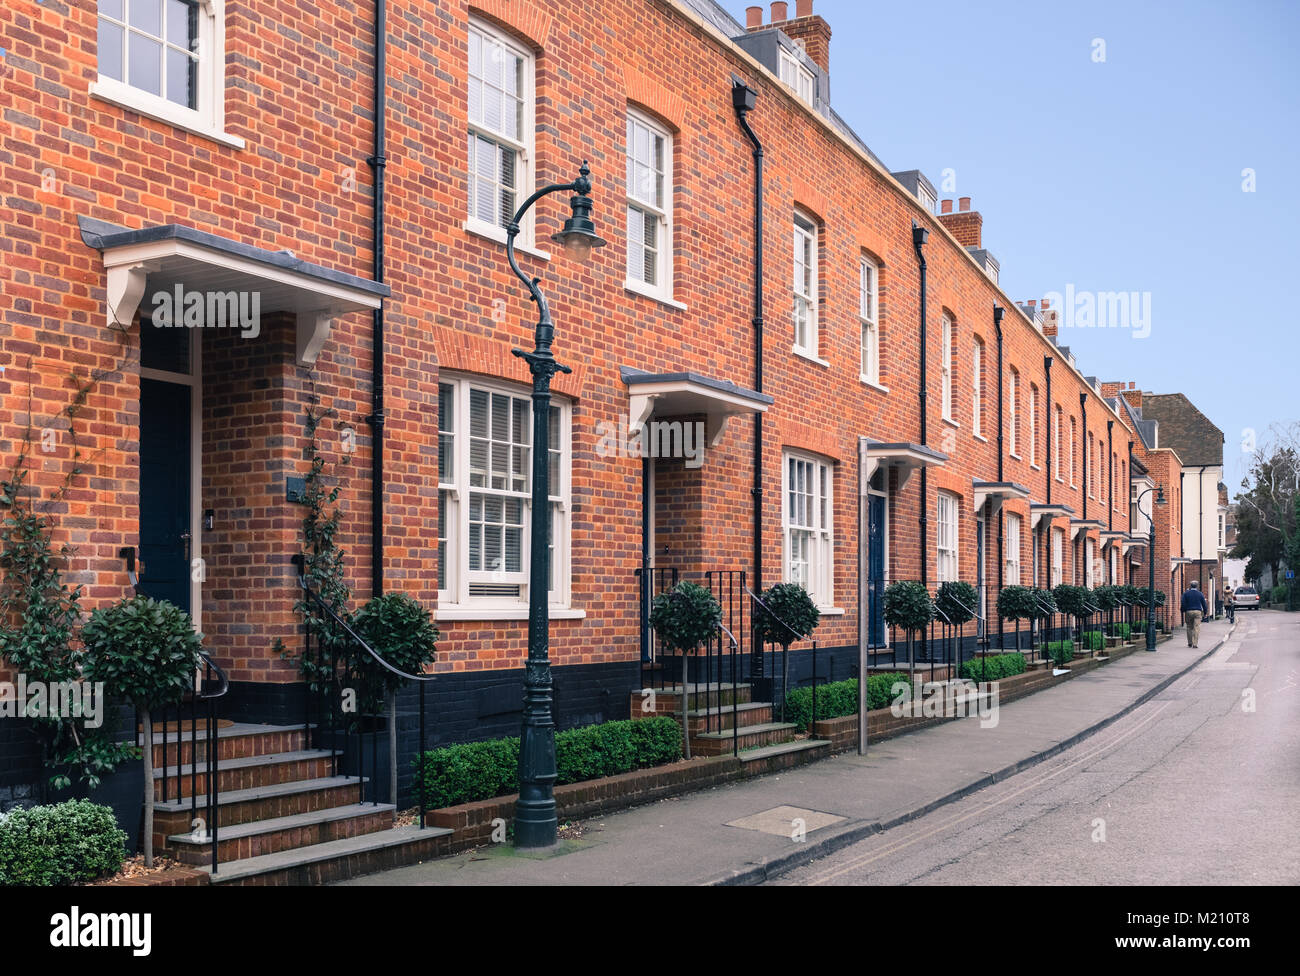 Red brick modern architecture terrace houses ( row houses ) with a retro, vintage Victorian sytle. There a vold fashin style street lamps , sash windo Stock Photo